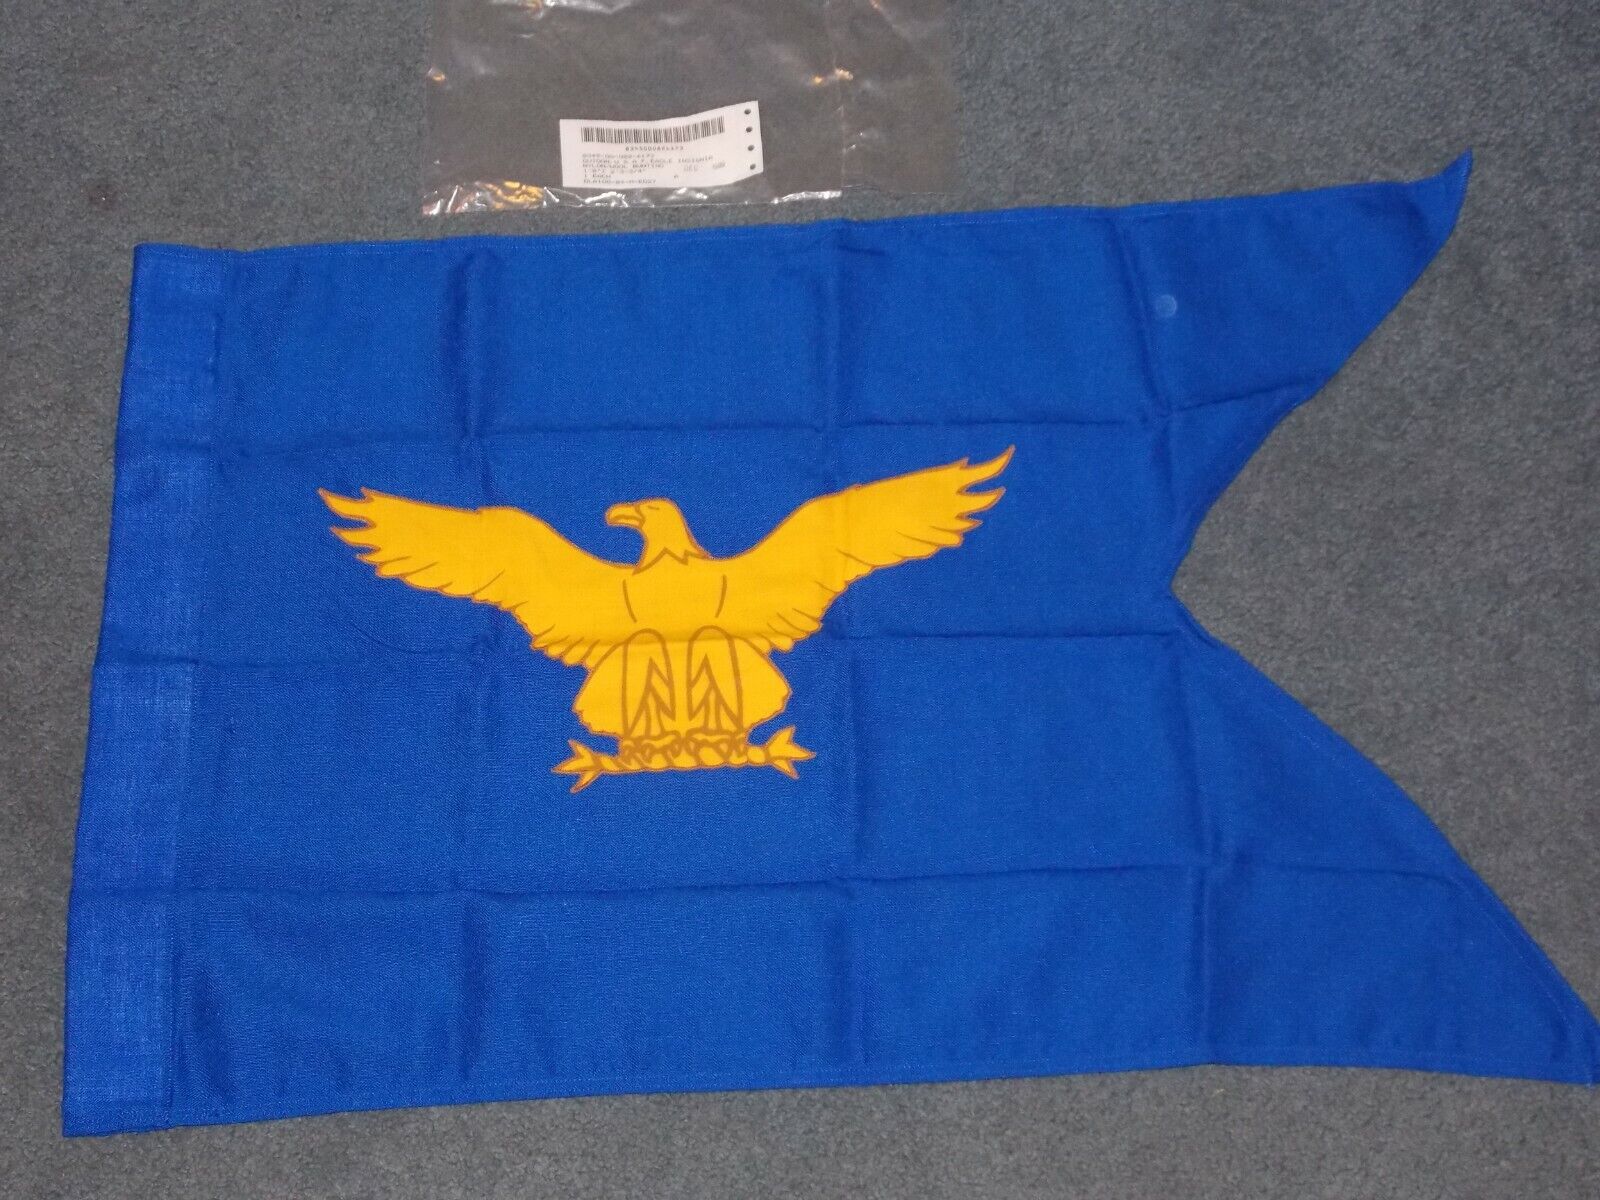 US Air Force Eagle Guidon Flag USAF - 20 INCH BY 27 3/4 INCH - NEW FROM 1989